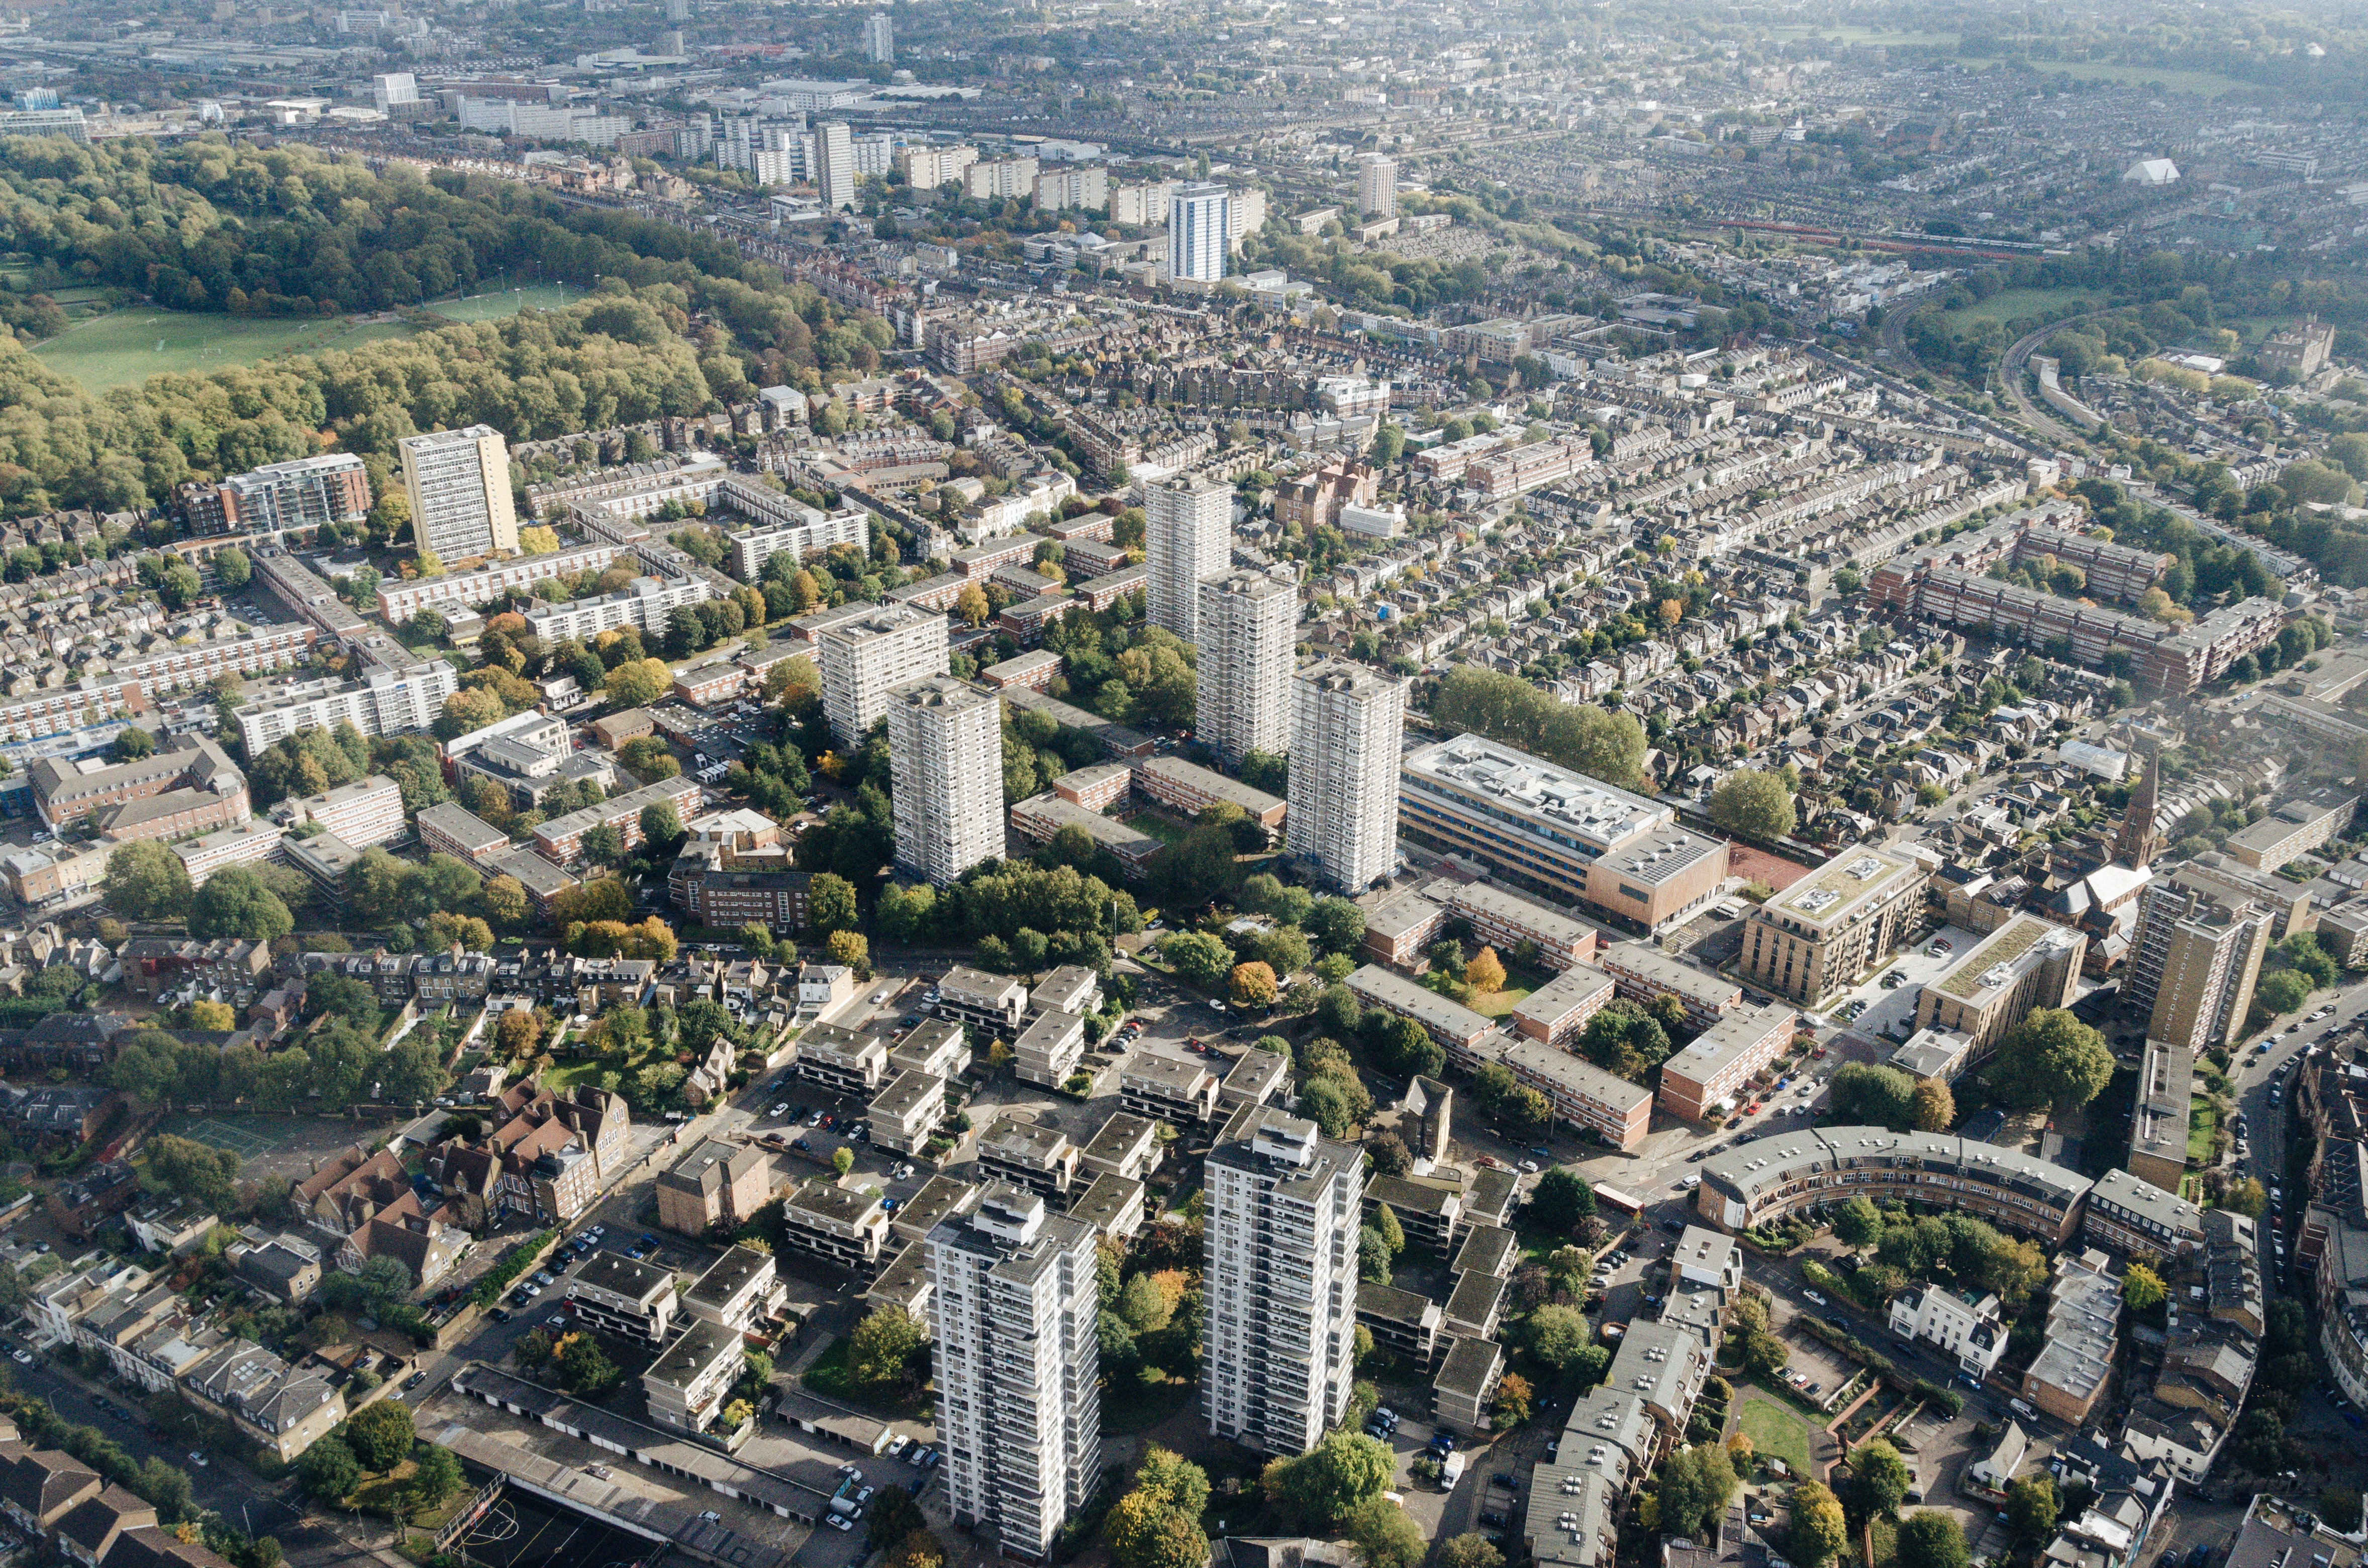 Aerial view of London urban infrastructure such as buildings, roads, and trees